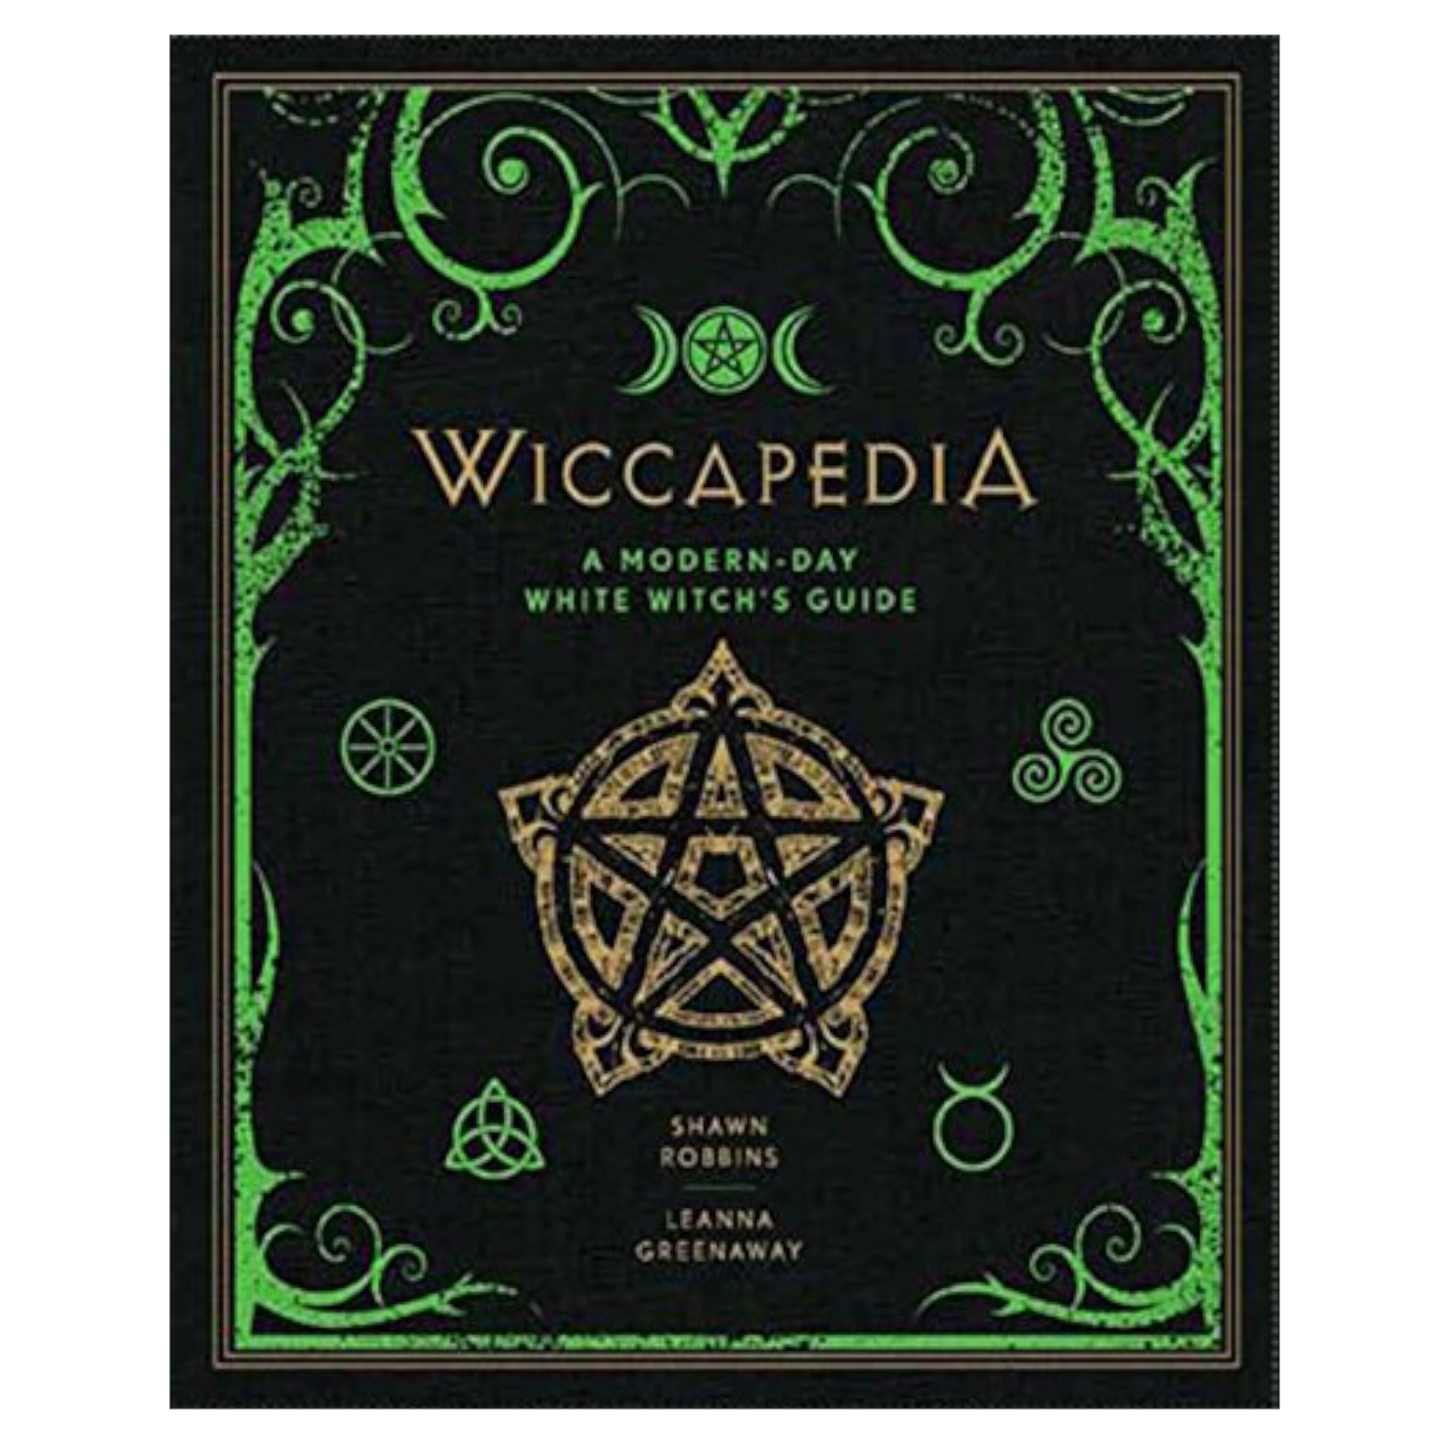 Wiccapedia - A Modern Day White Witch's Guide